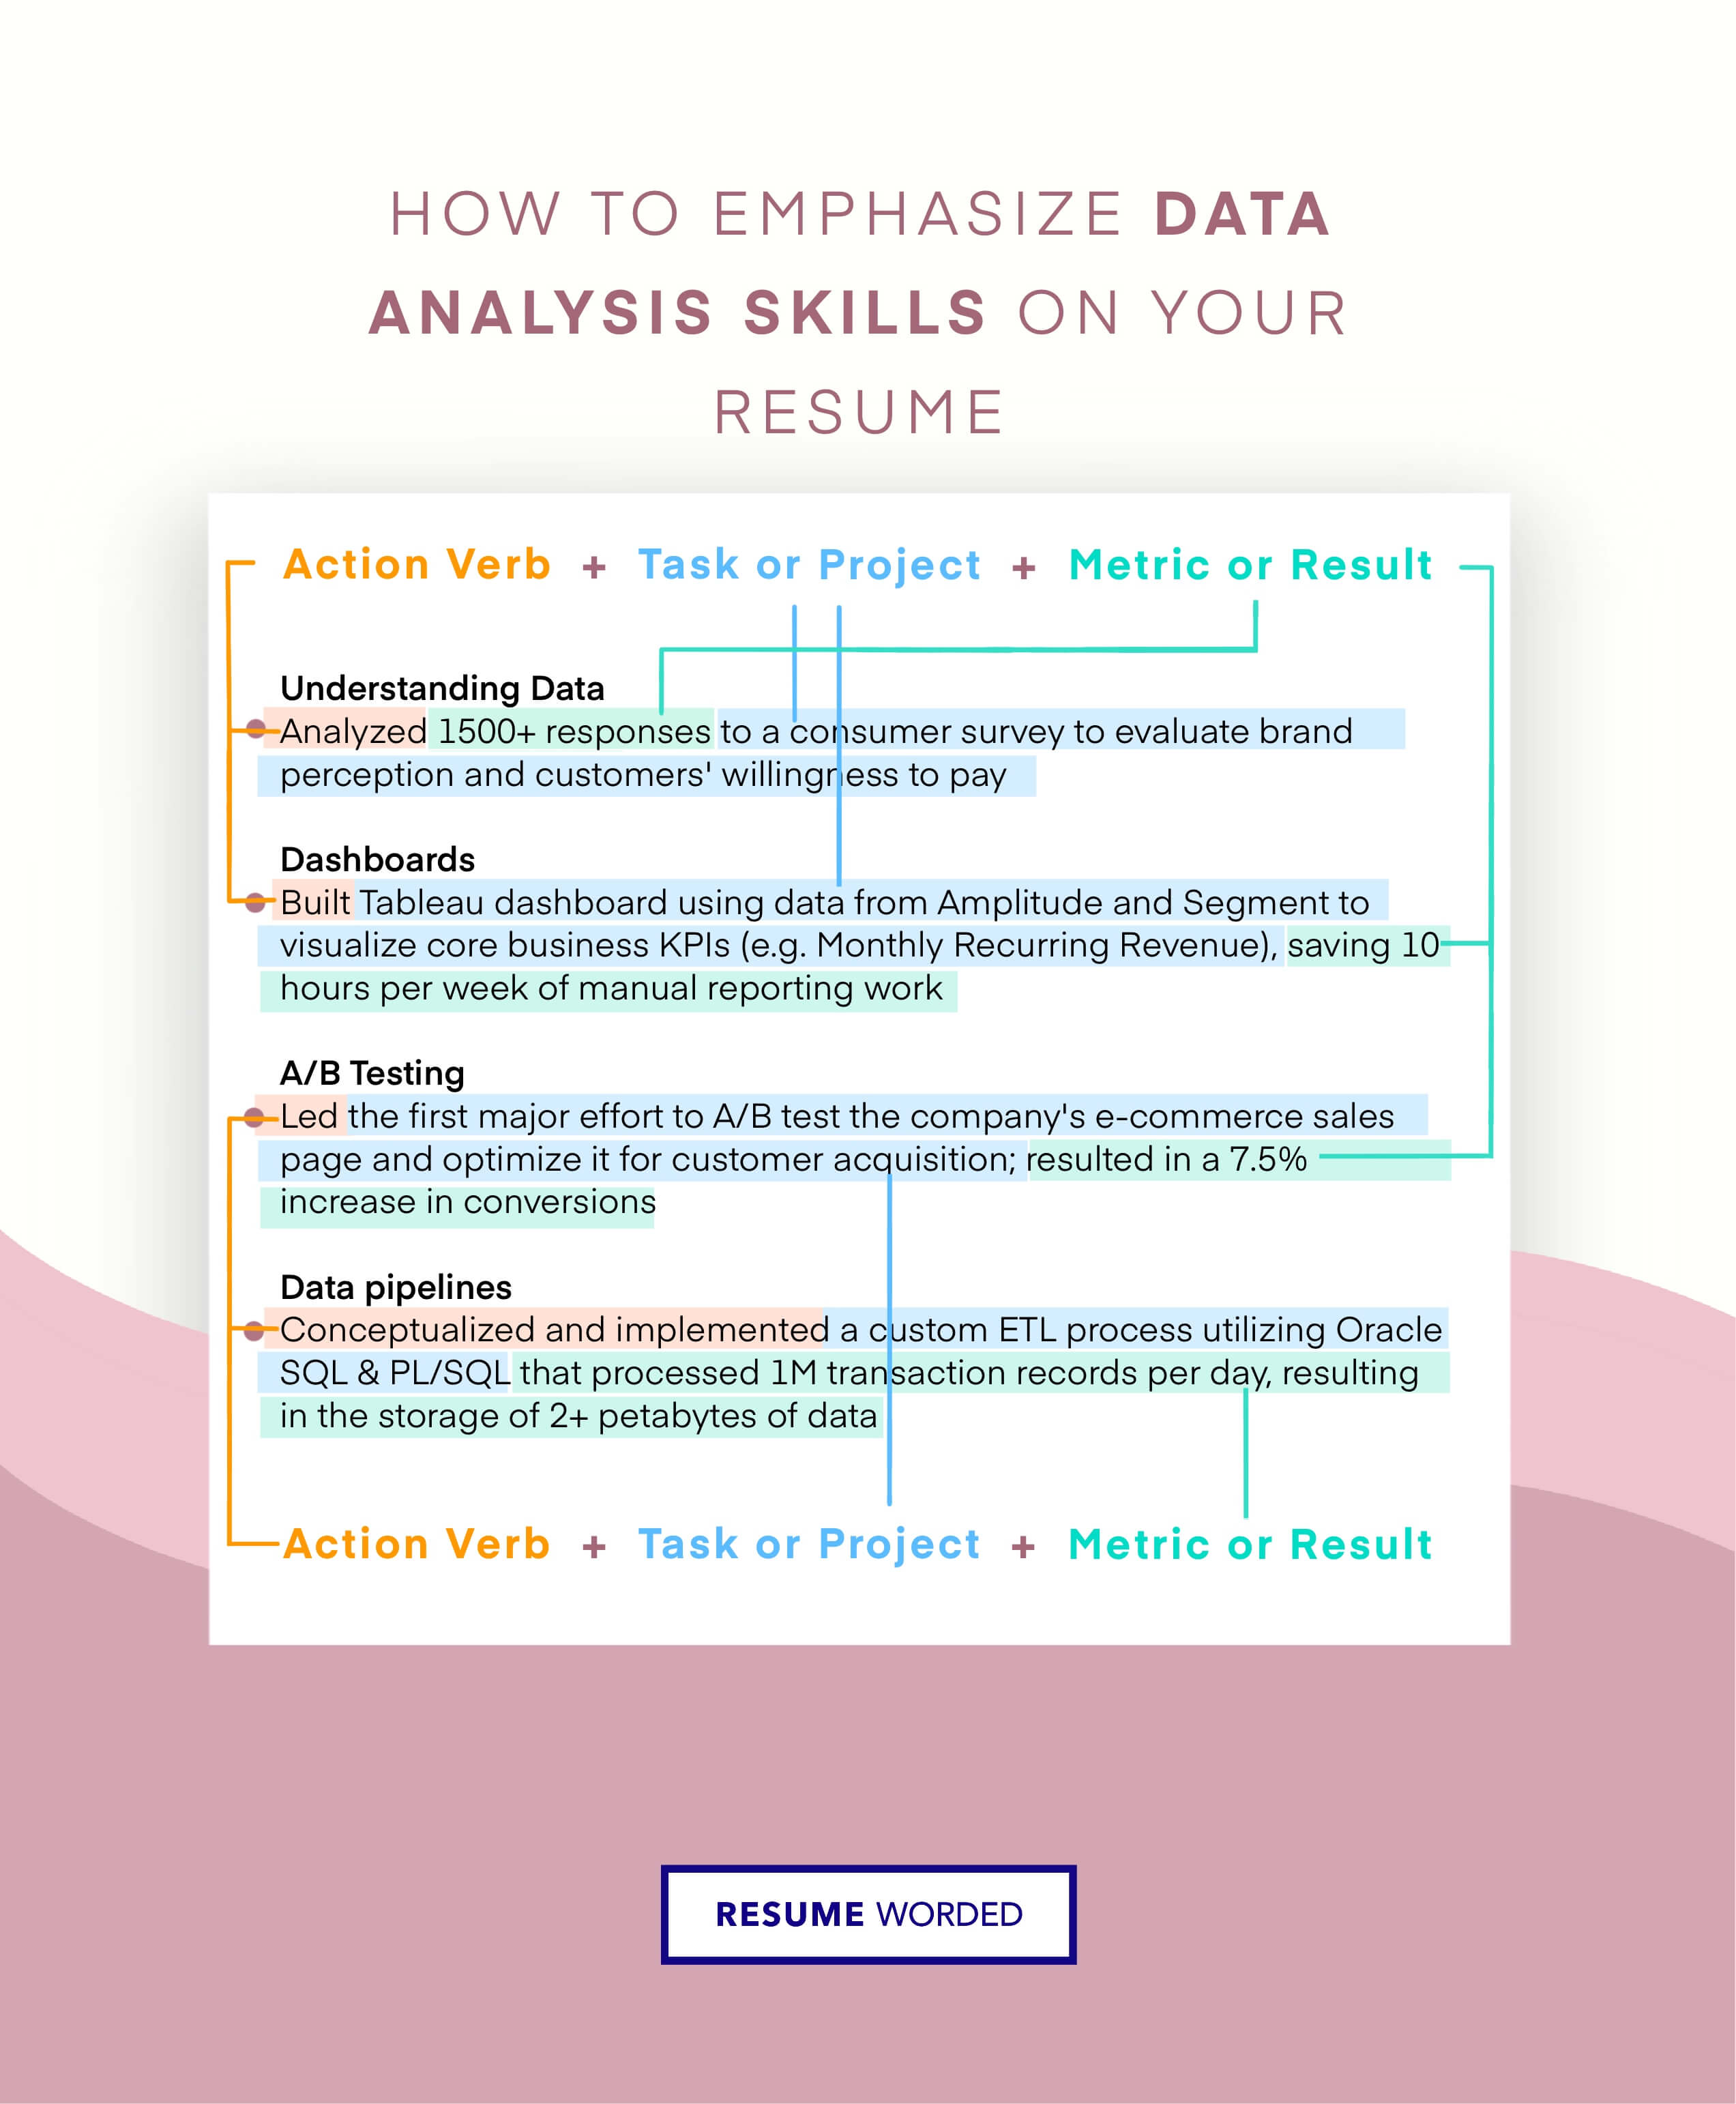 Include up-to-date data analysis or big data skill sets on your resume, like TinyML. - Data Scientist Resume